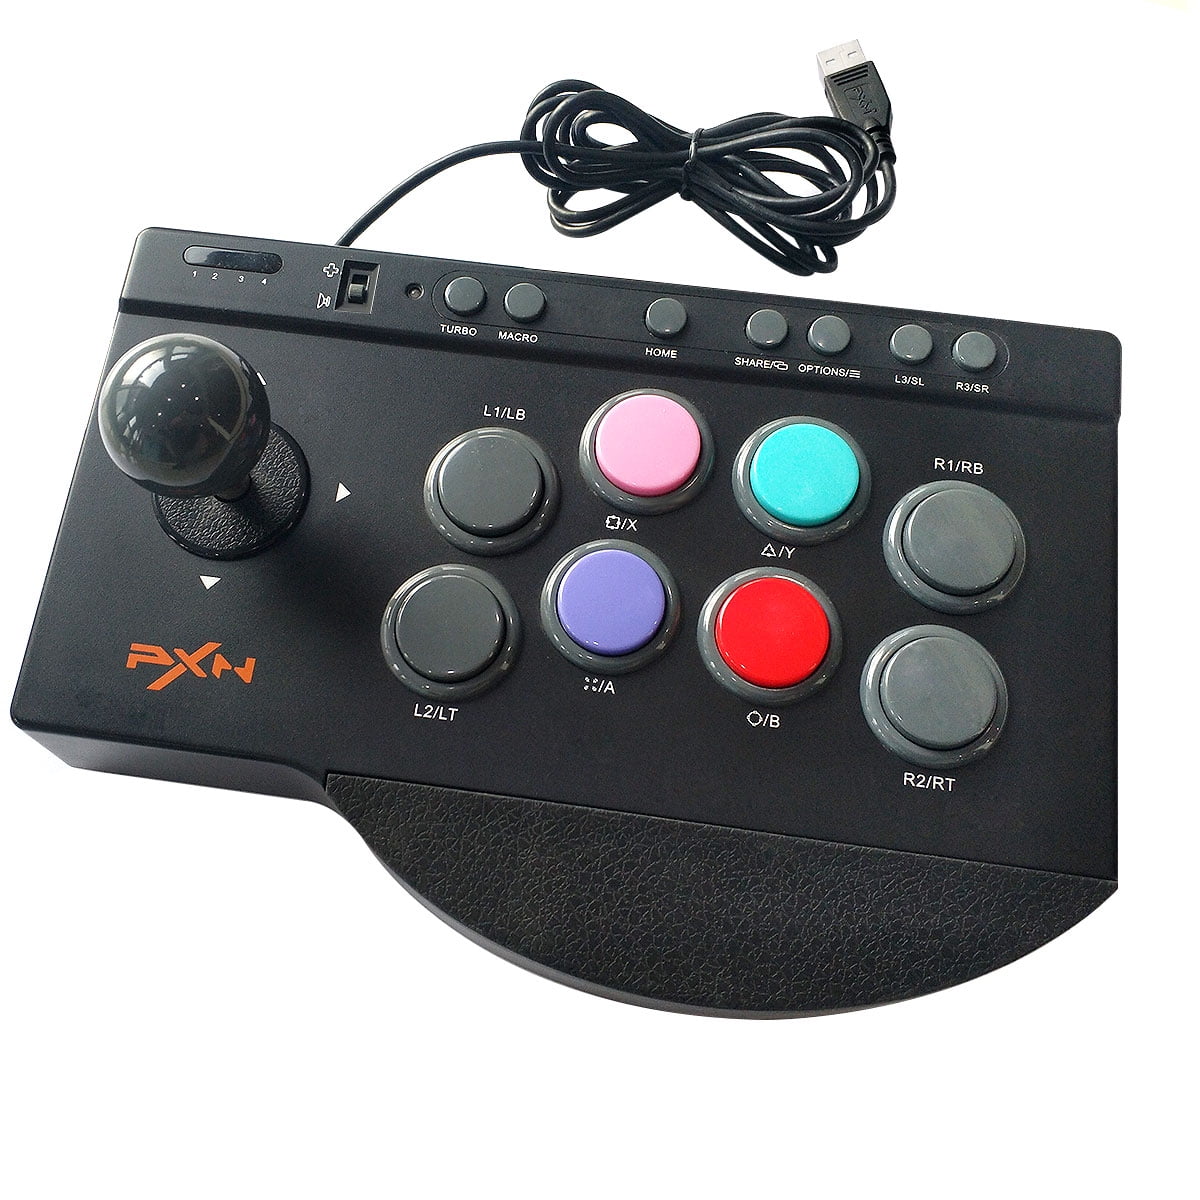 administration Costumes Rational PXN 0082 Arcade Fight Stick Joystick for PC, PS3, PS4, Xbox one, Xbox  Series X|S, Nintendo Switch - Walmart.com